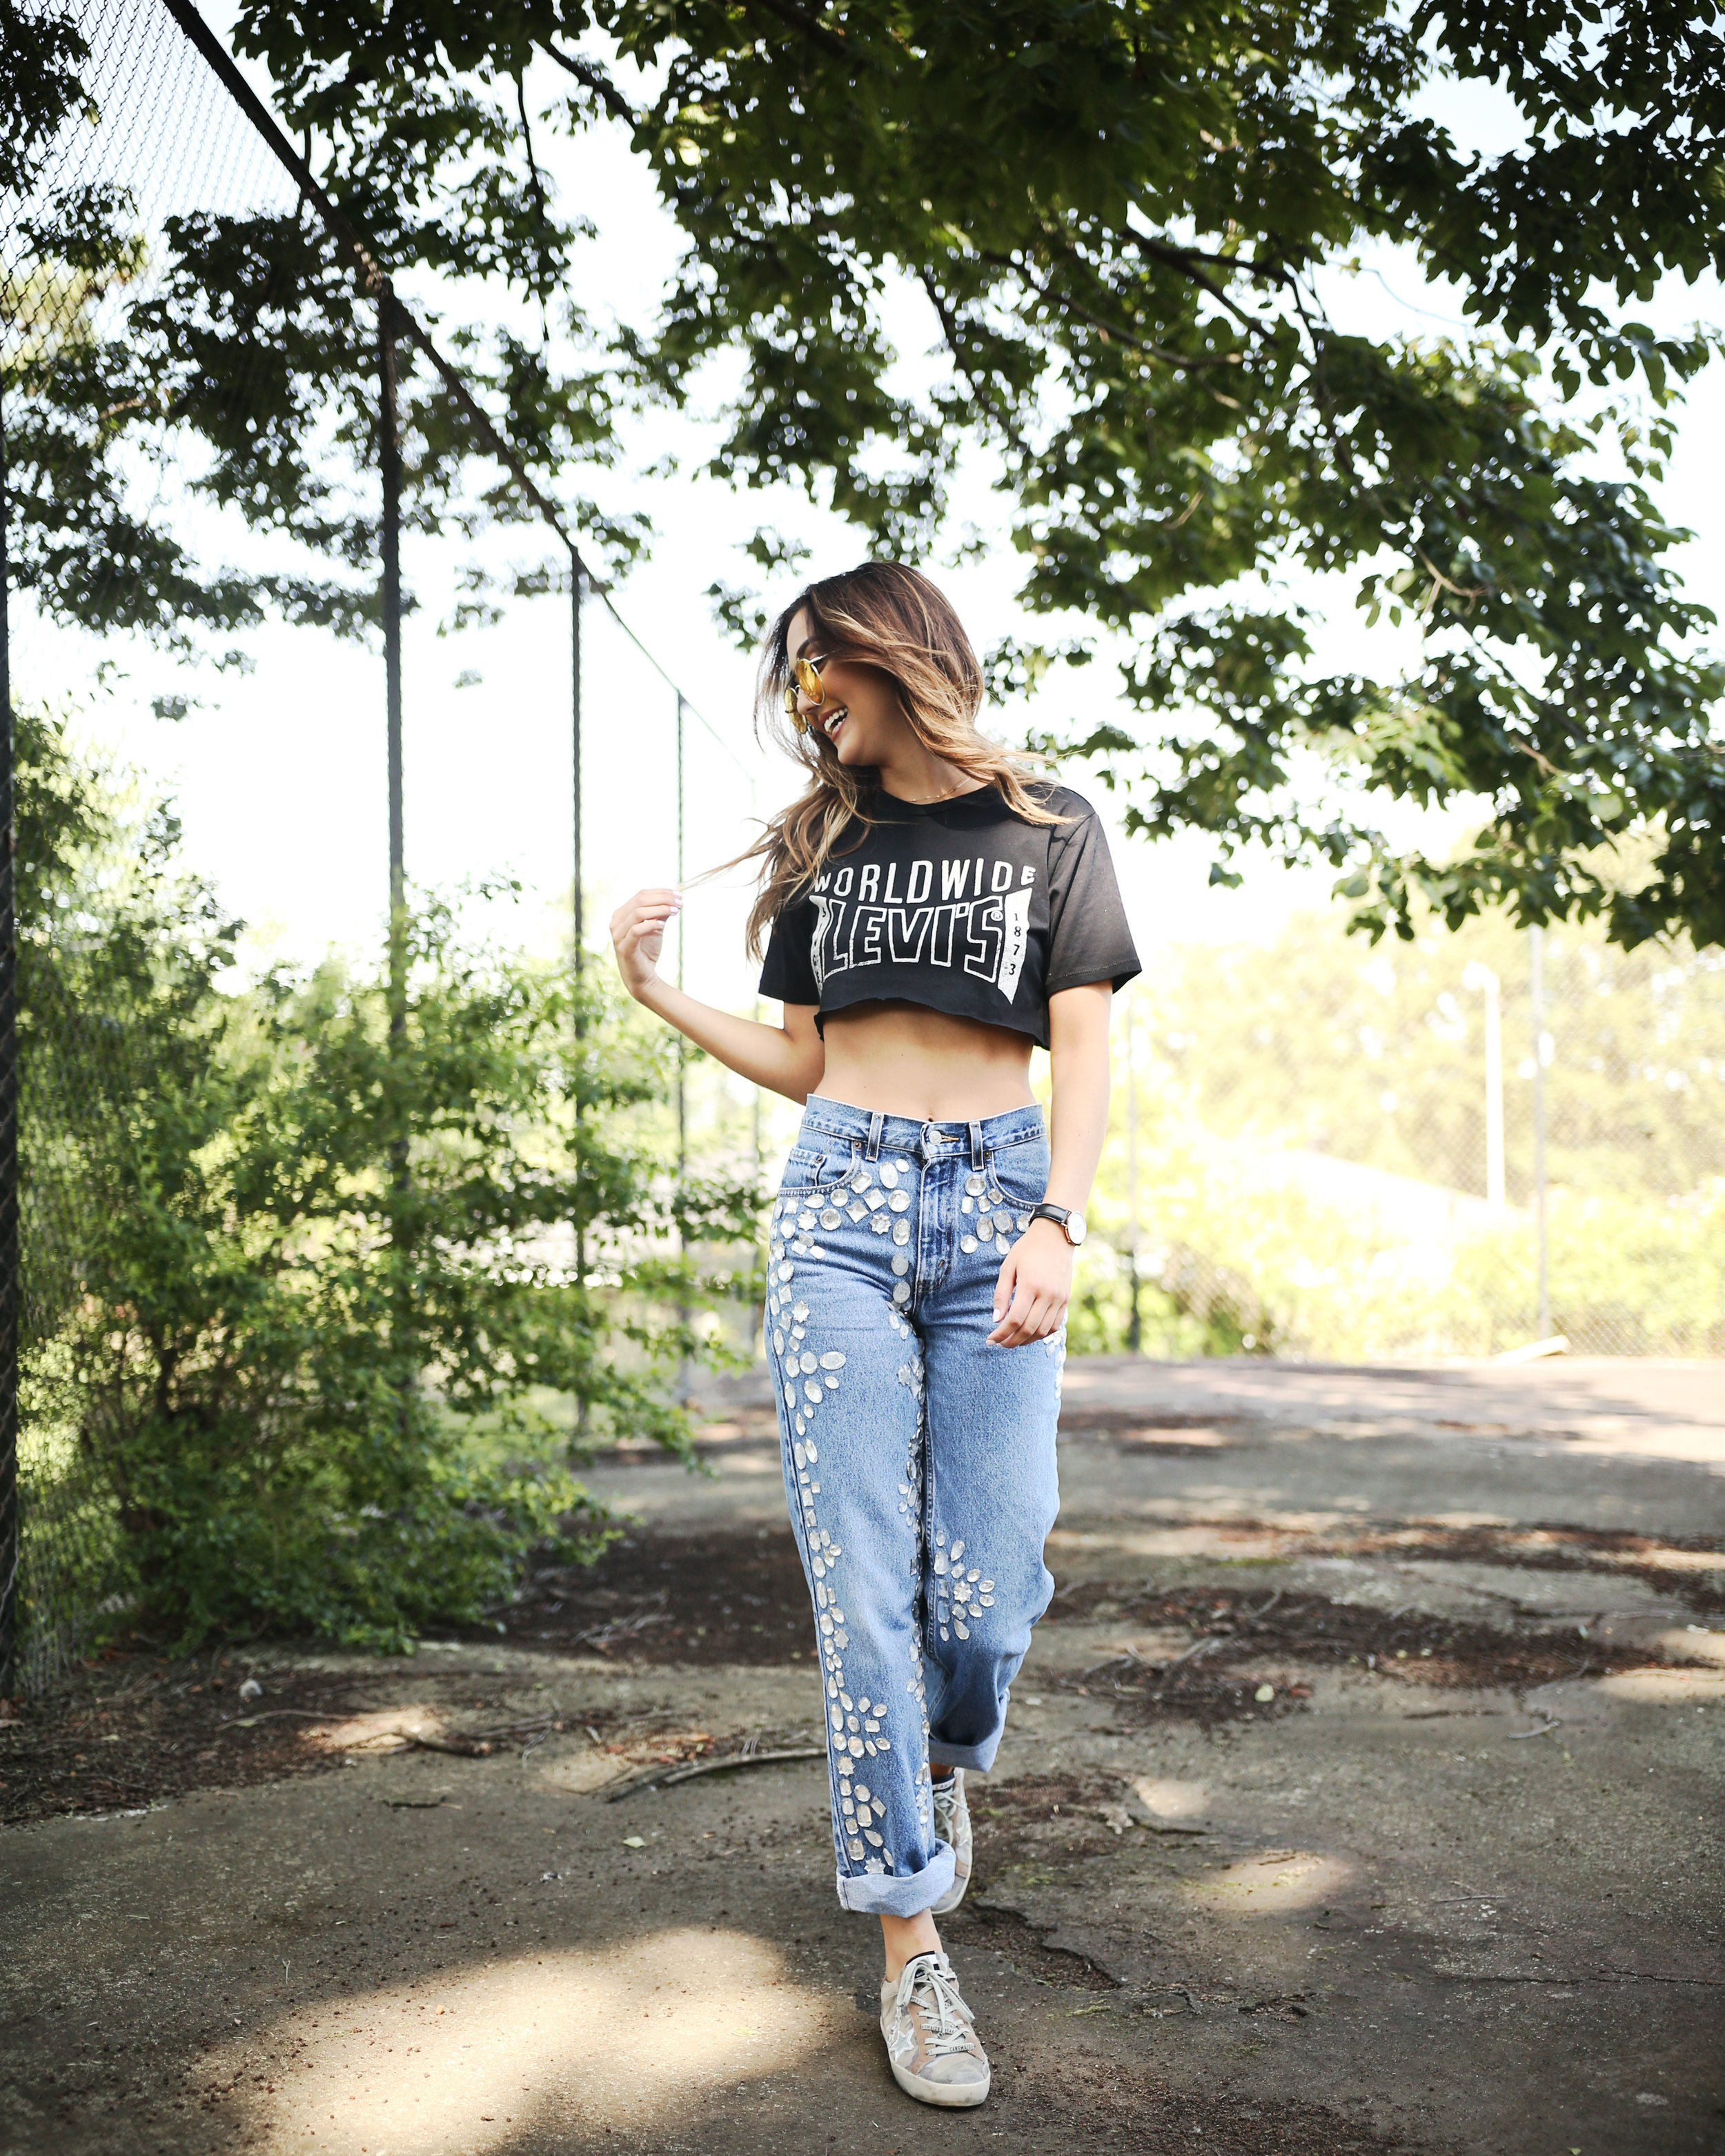 Gigi Hadid poses in a metallic crop top and loose-fitting jeans during a  photoshoot at